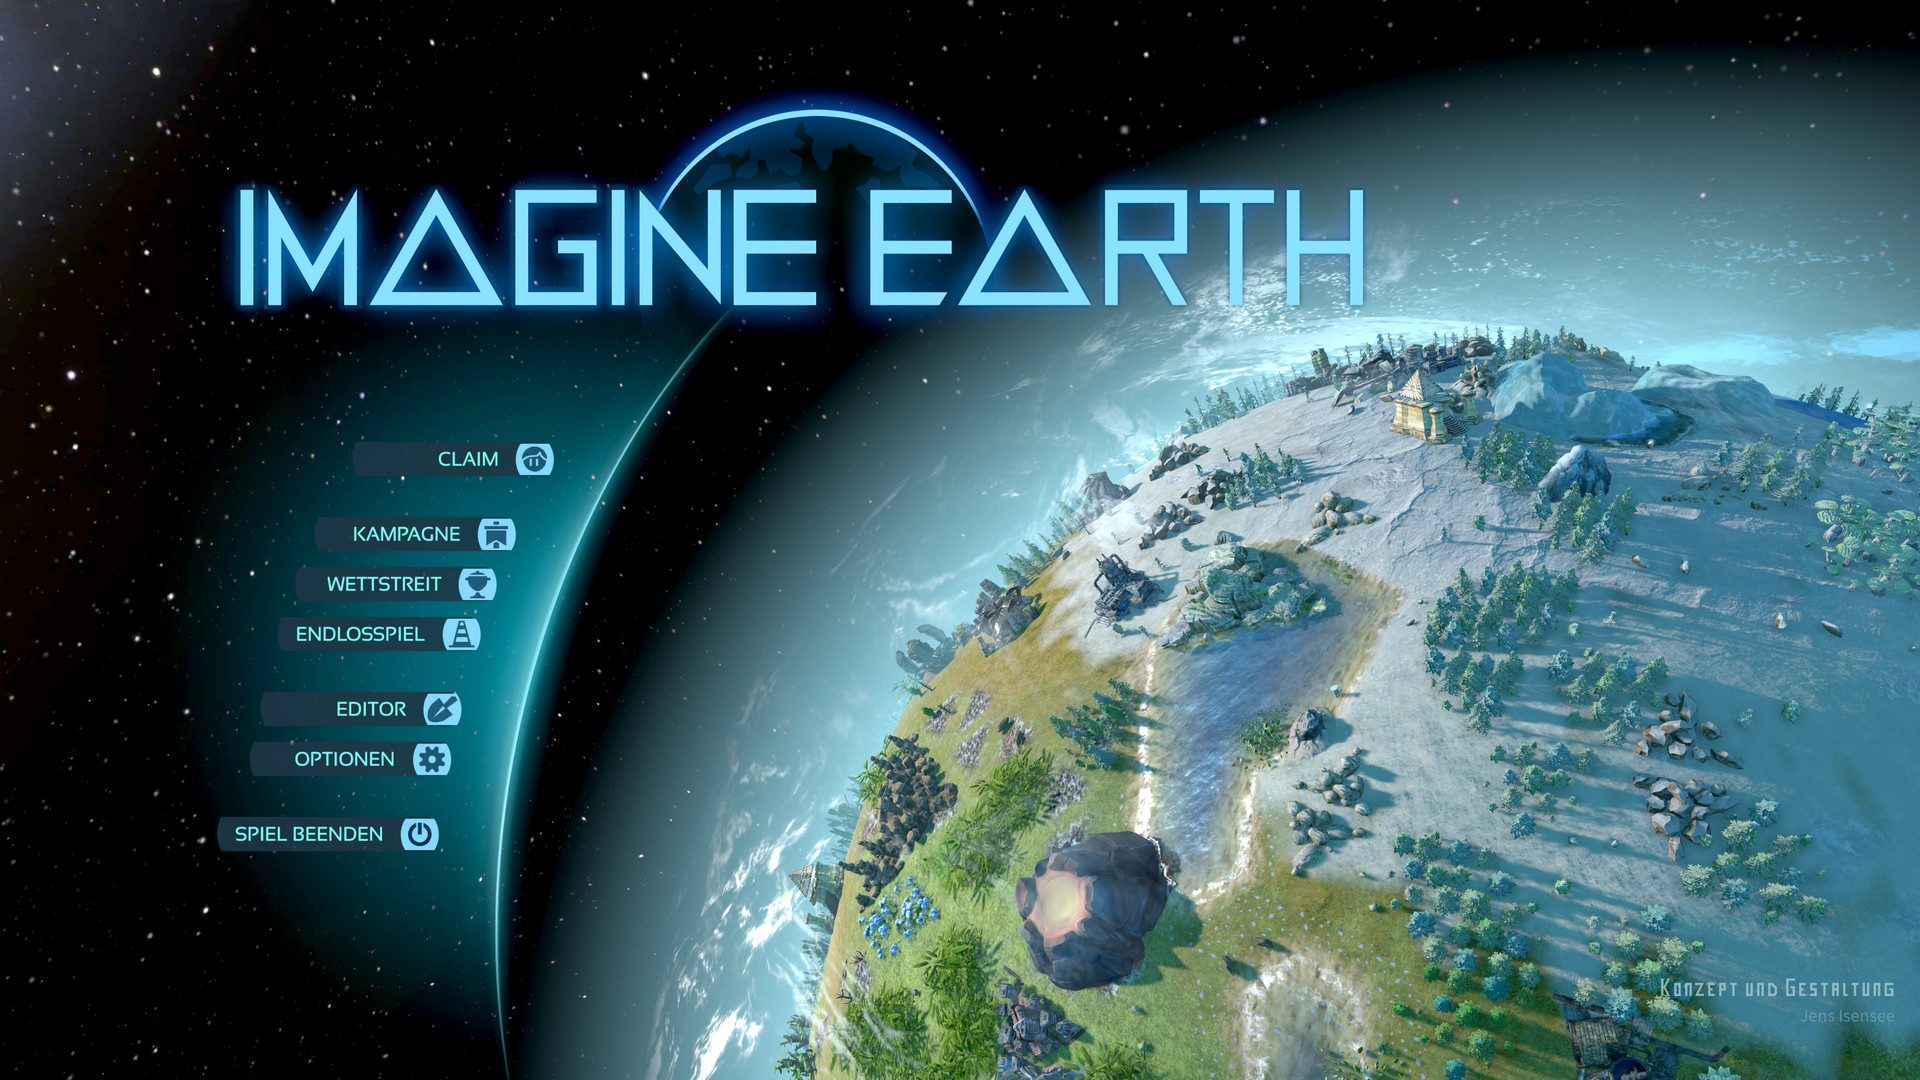 Imagine Earth Images 